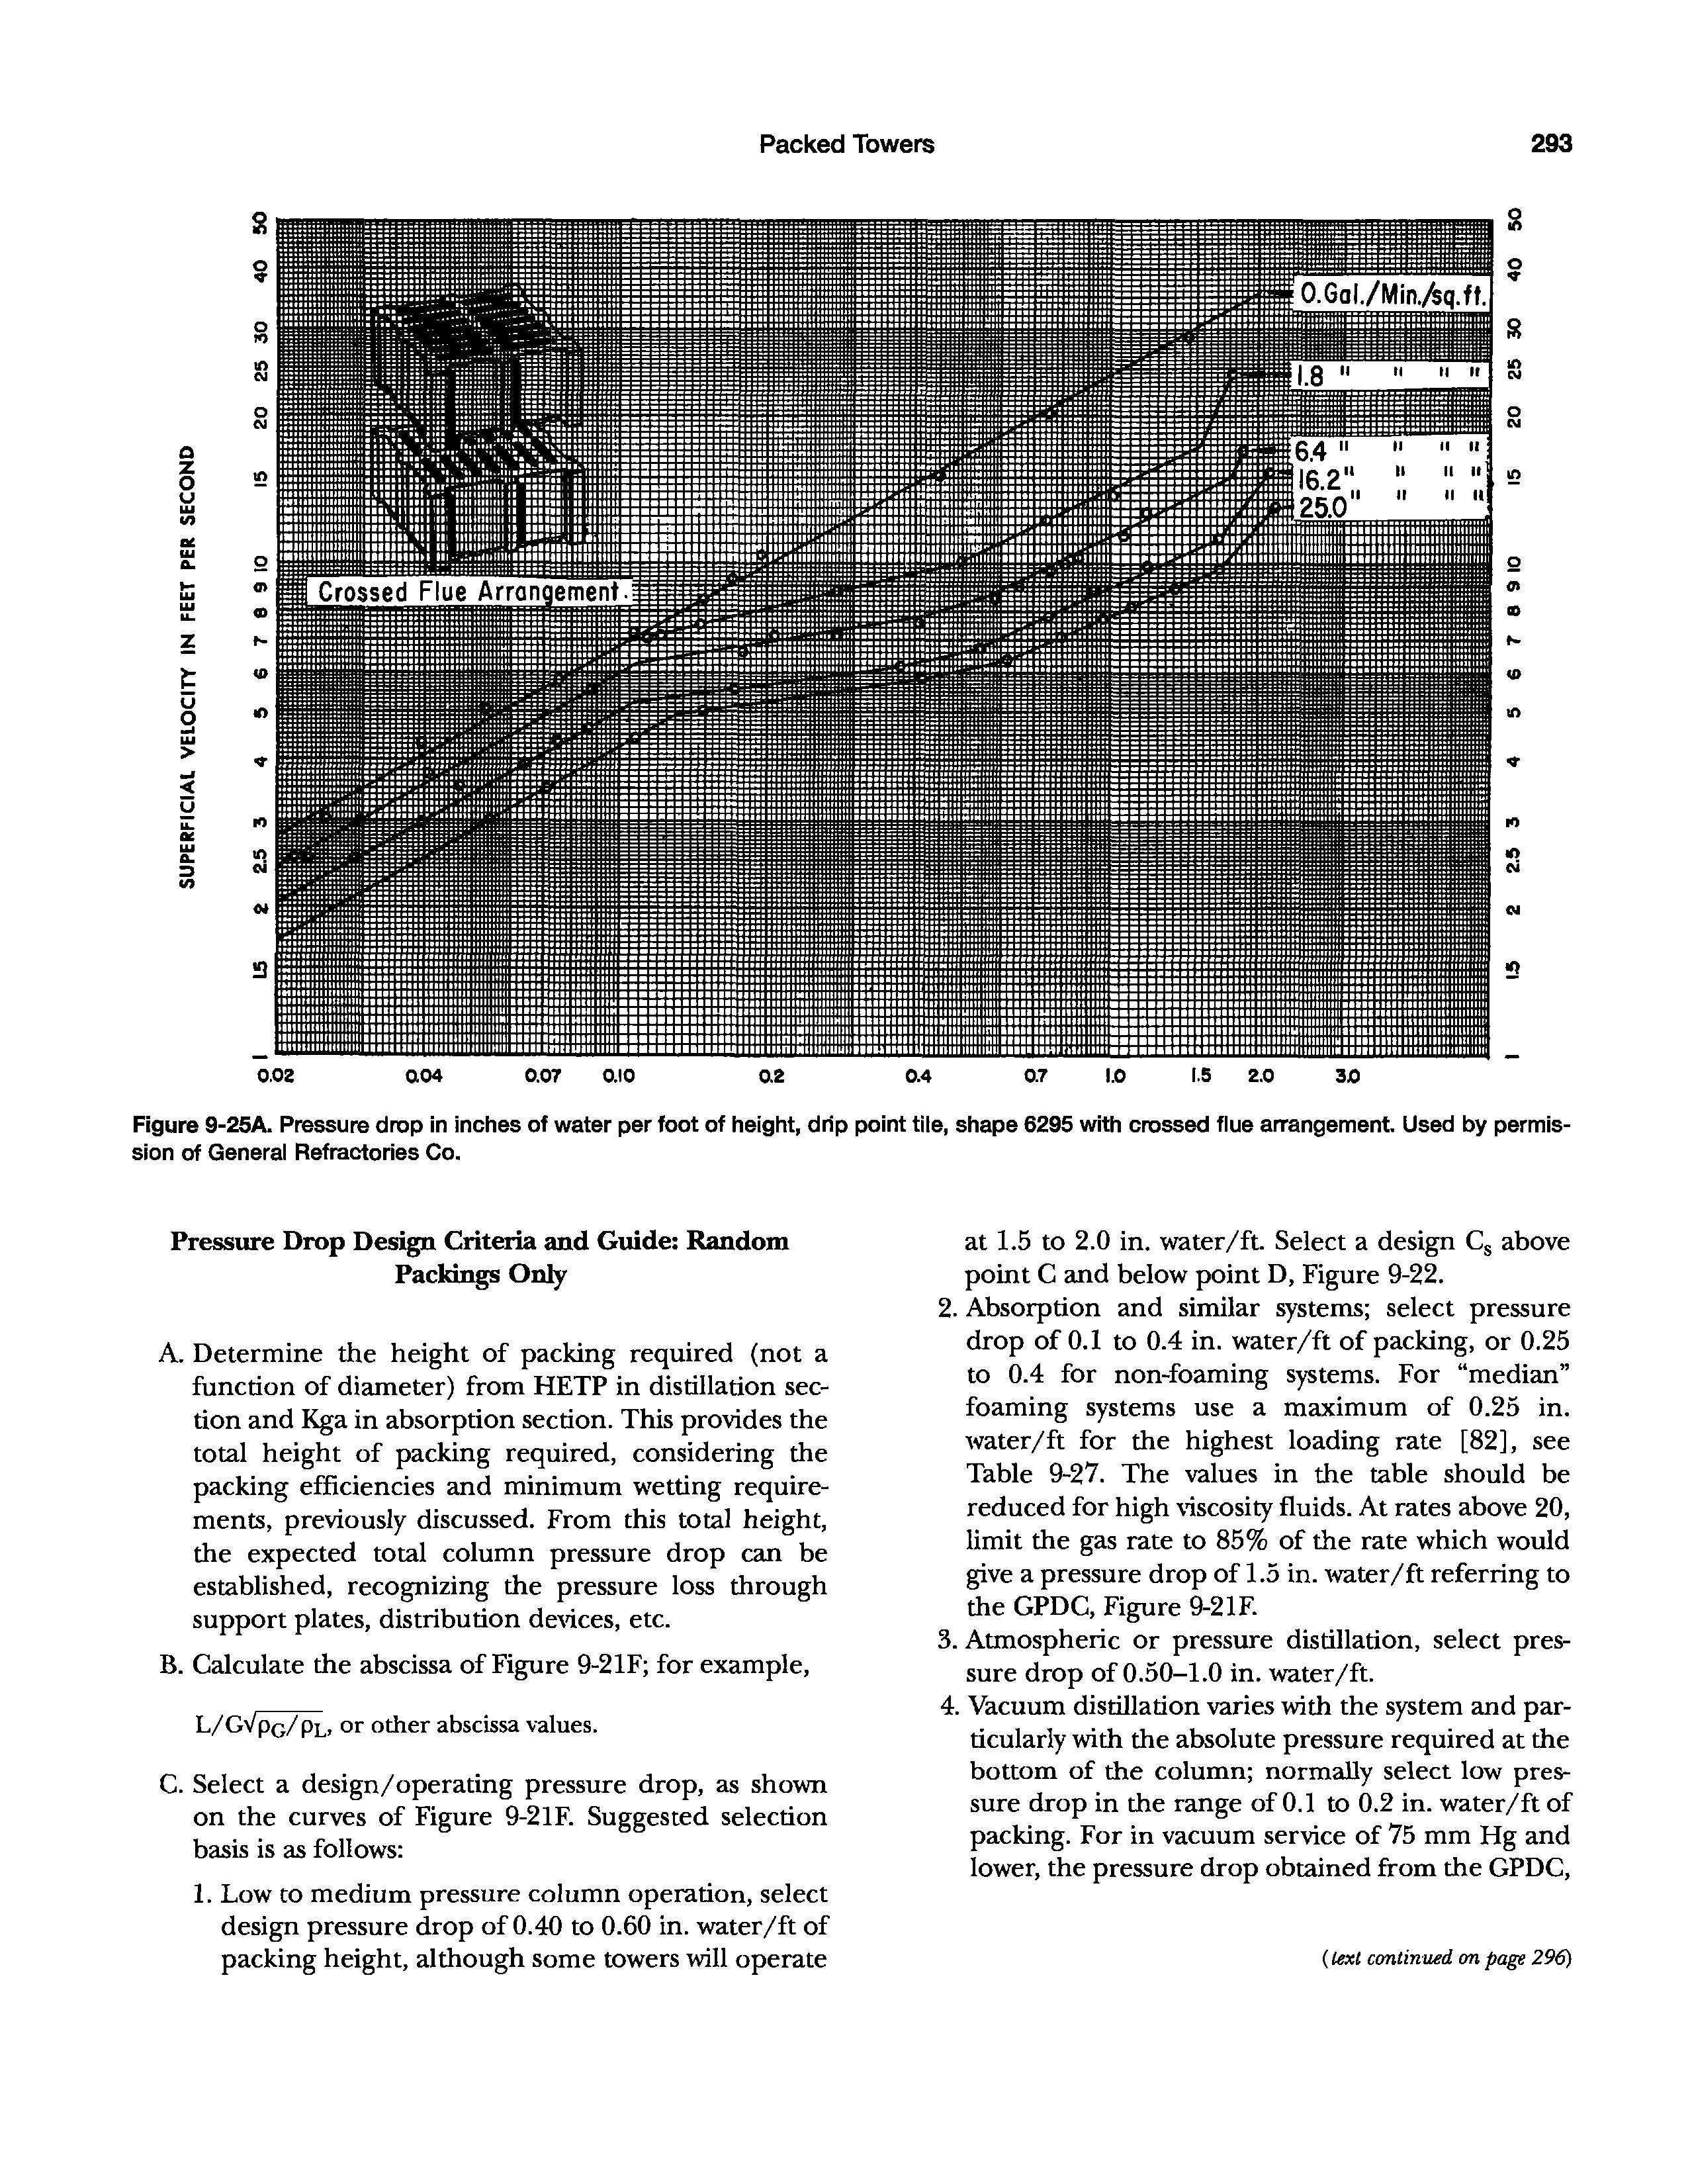 Figure 9-25A. Pressure drop in inches of water per foot of height, drip point tile, shape 6295 with crossed flue arrangement. Used by permission of General Refractories Co.